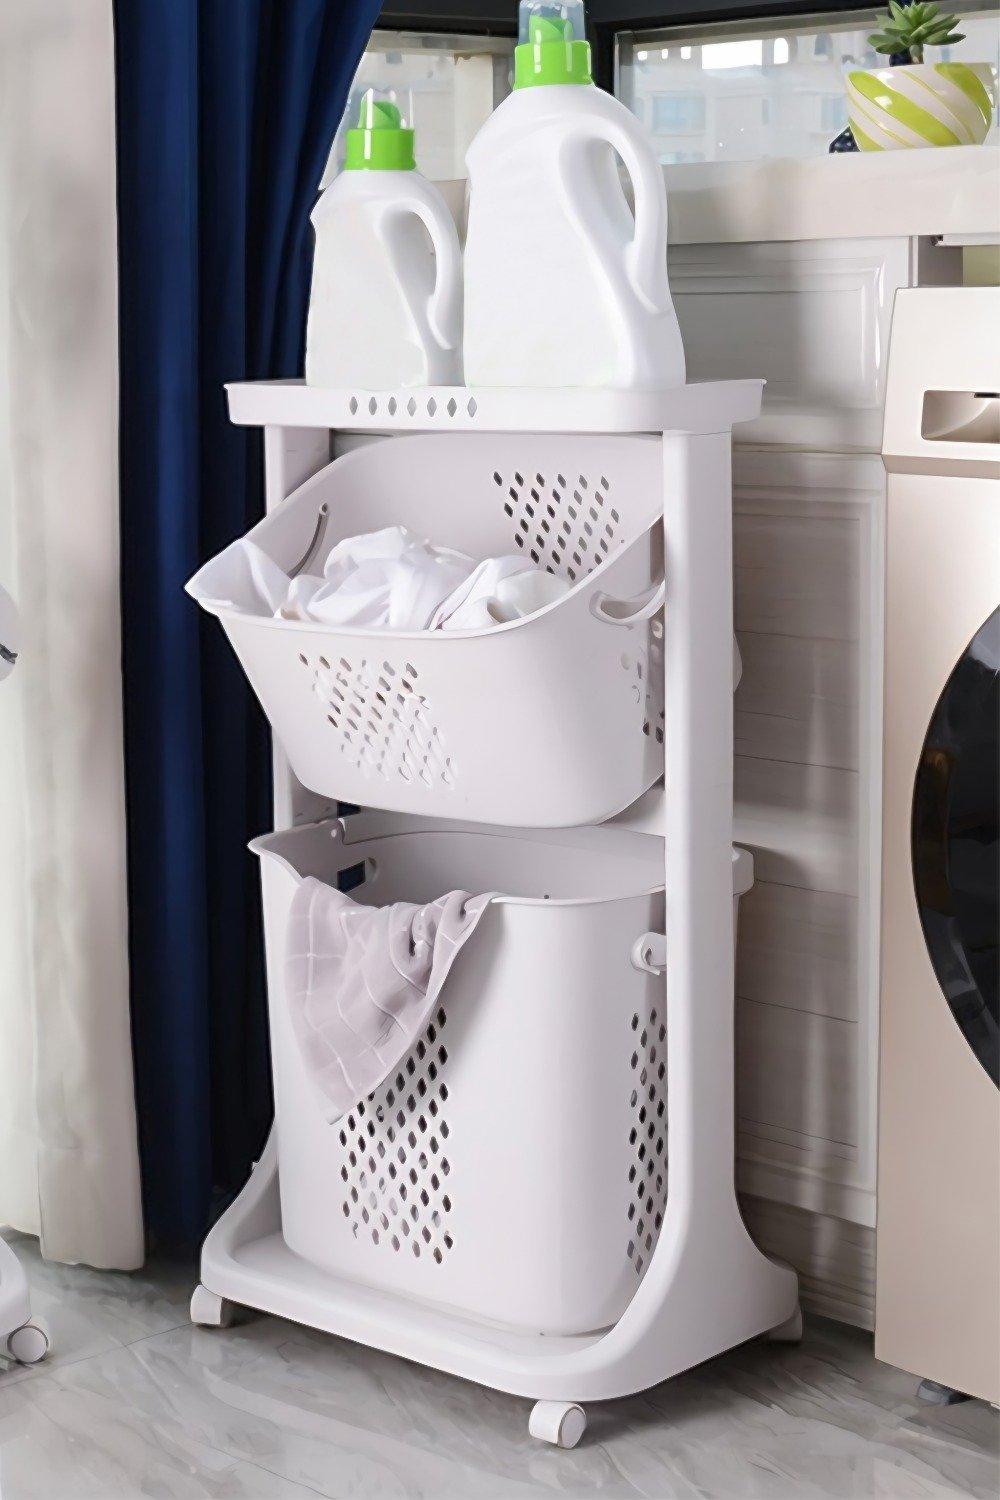 2 Tiers Laundry Basket Ventilated Clothes Storage Shelf Detachable Hamper Rotatable Sorter Cart with